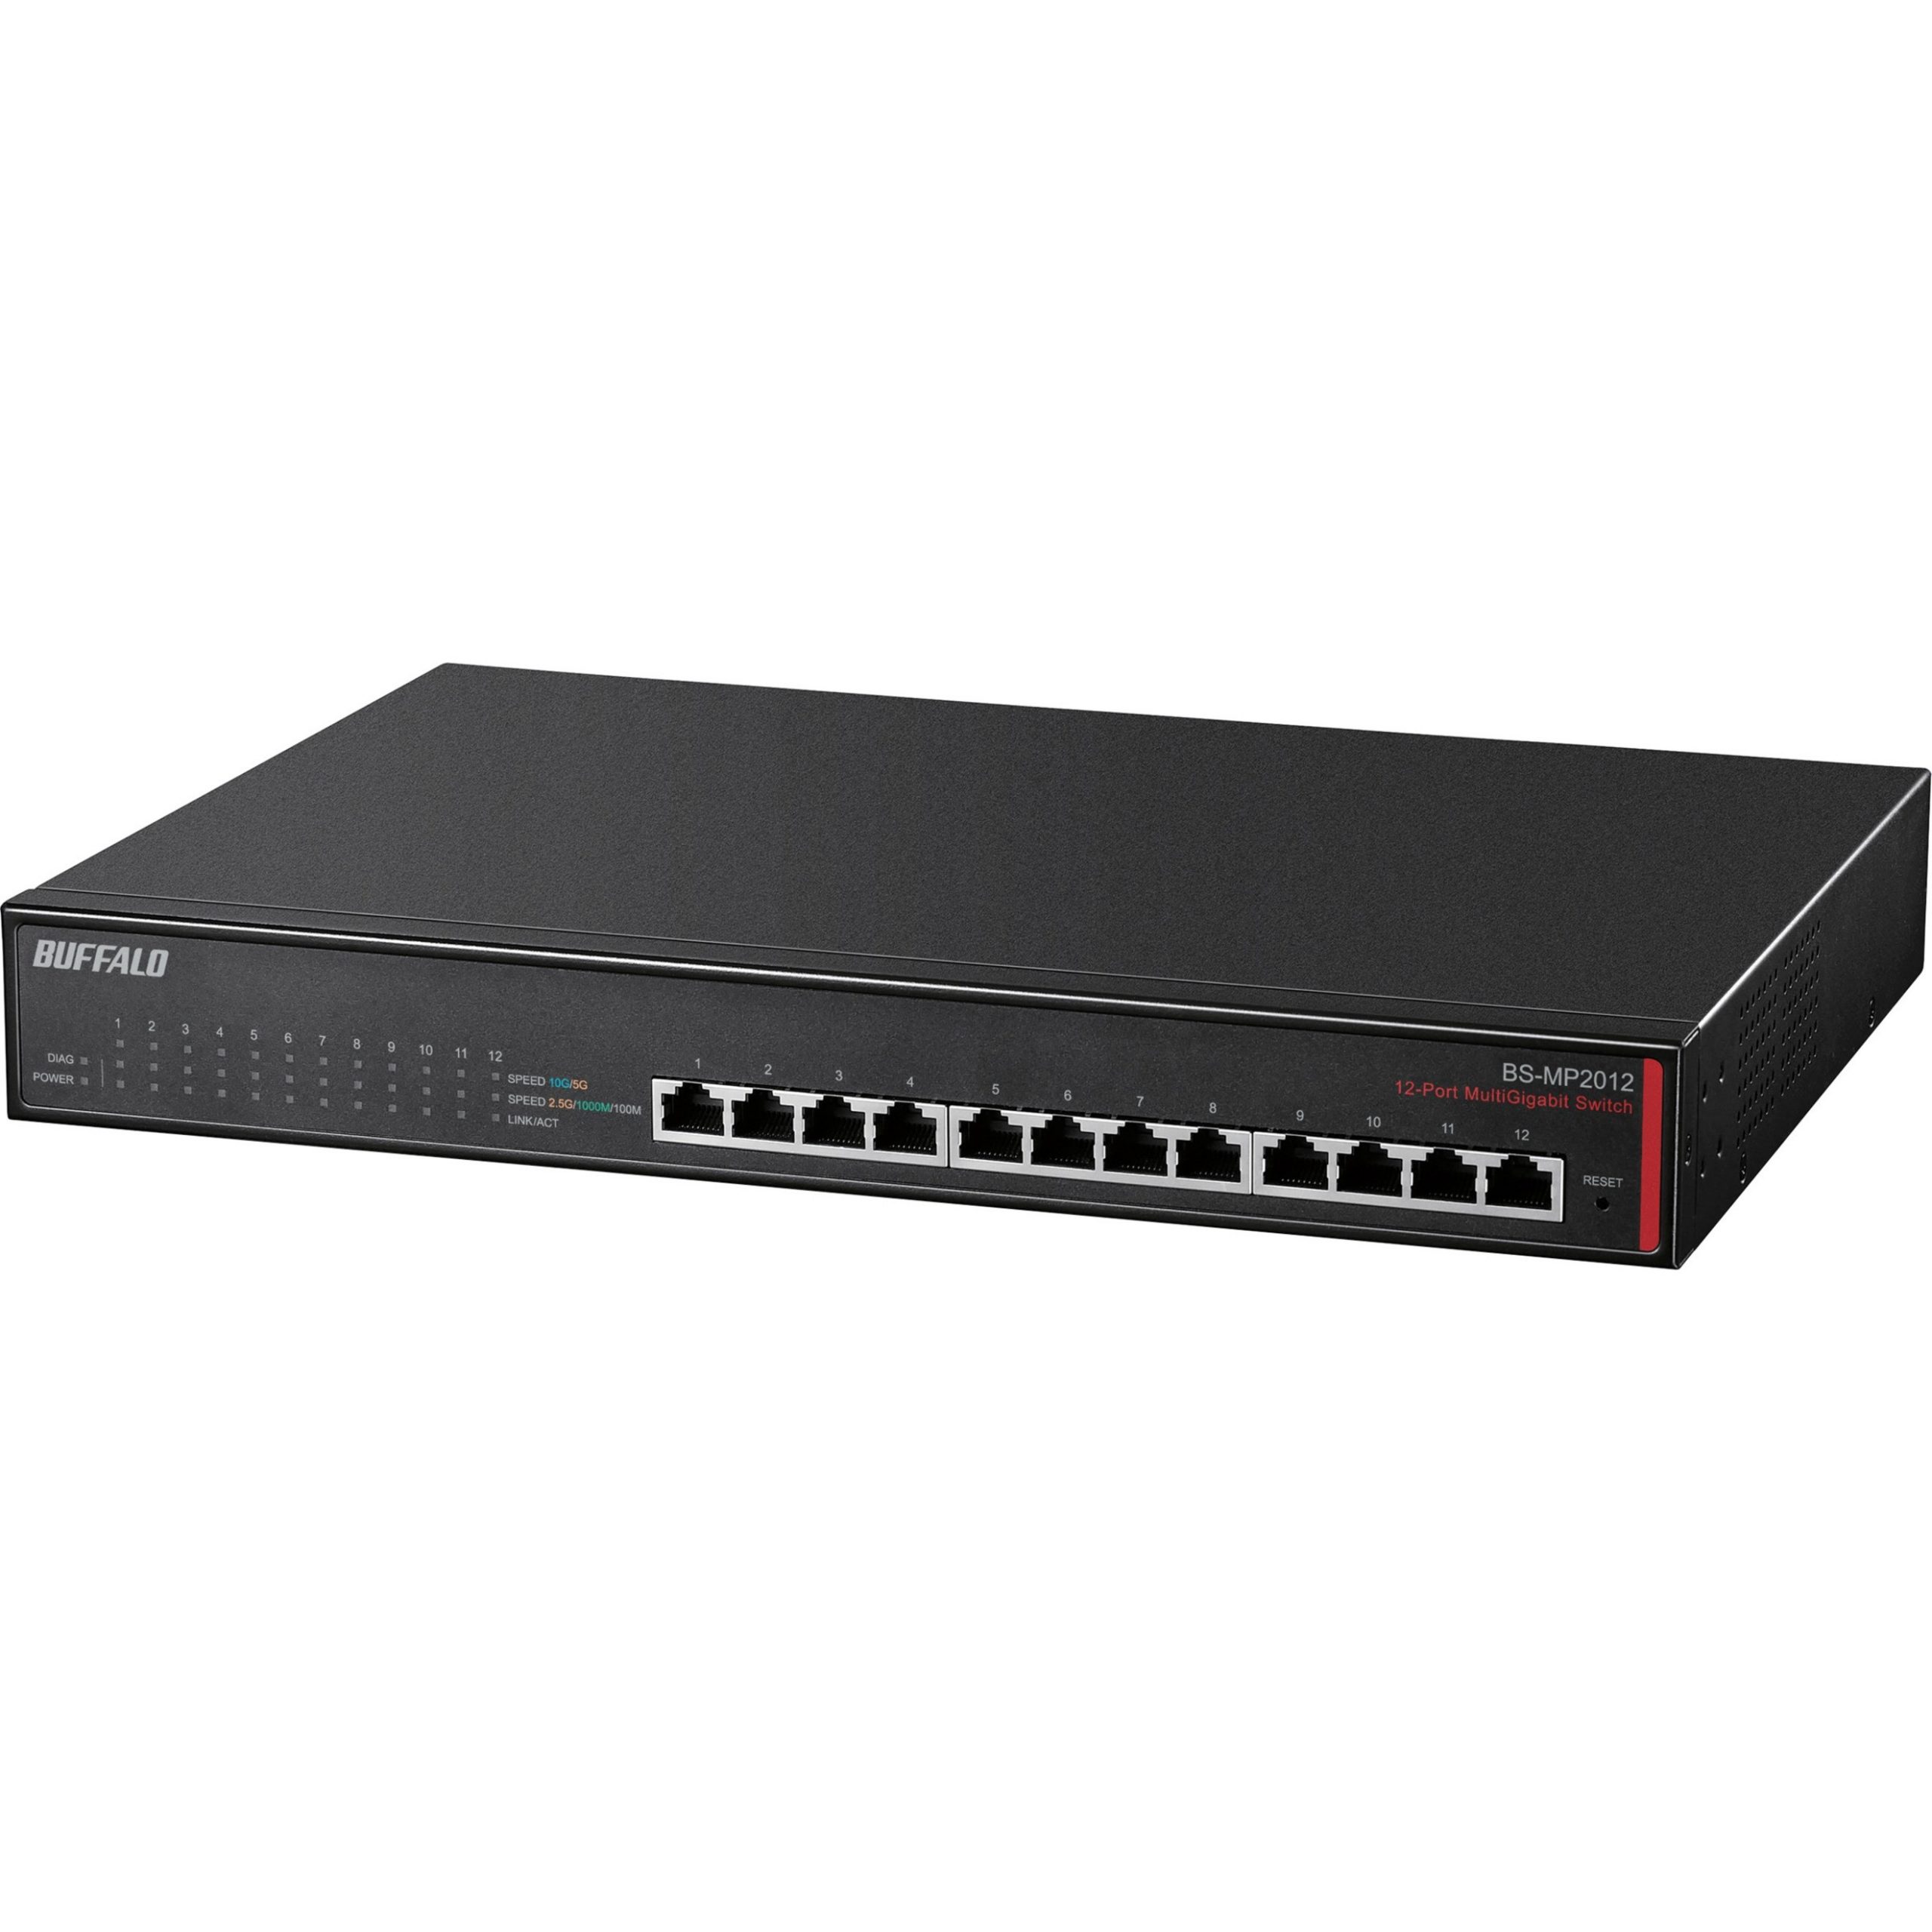 Buffalo Multi-Gigabit 12 Business Switch (BS-MP2012)12 Ports10 Gigabit Ethernet10GBase-T2 Layer SupportedTwisted PairD... BS-MP2012 - Corporate Armor